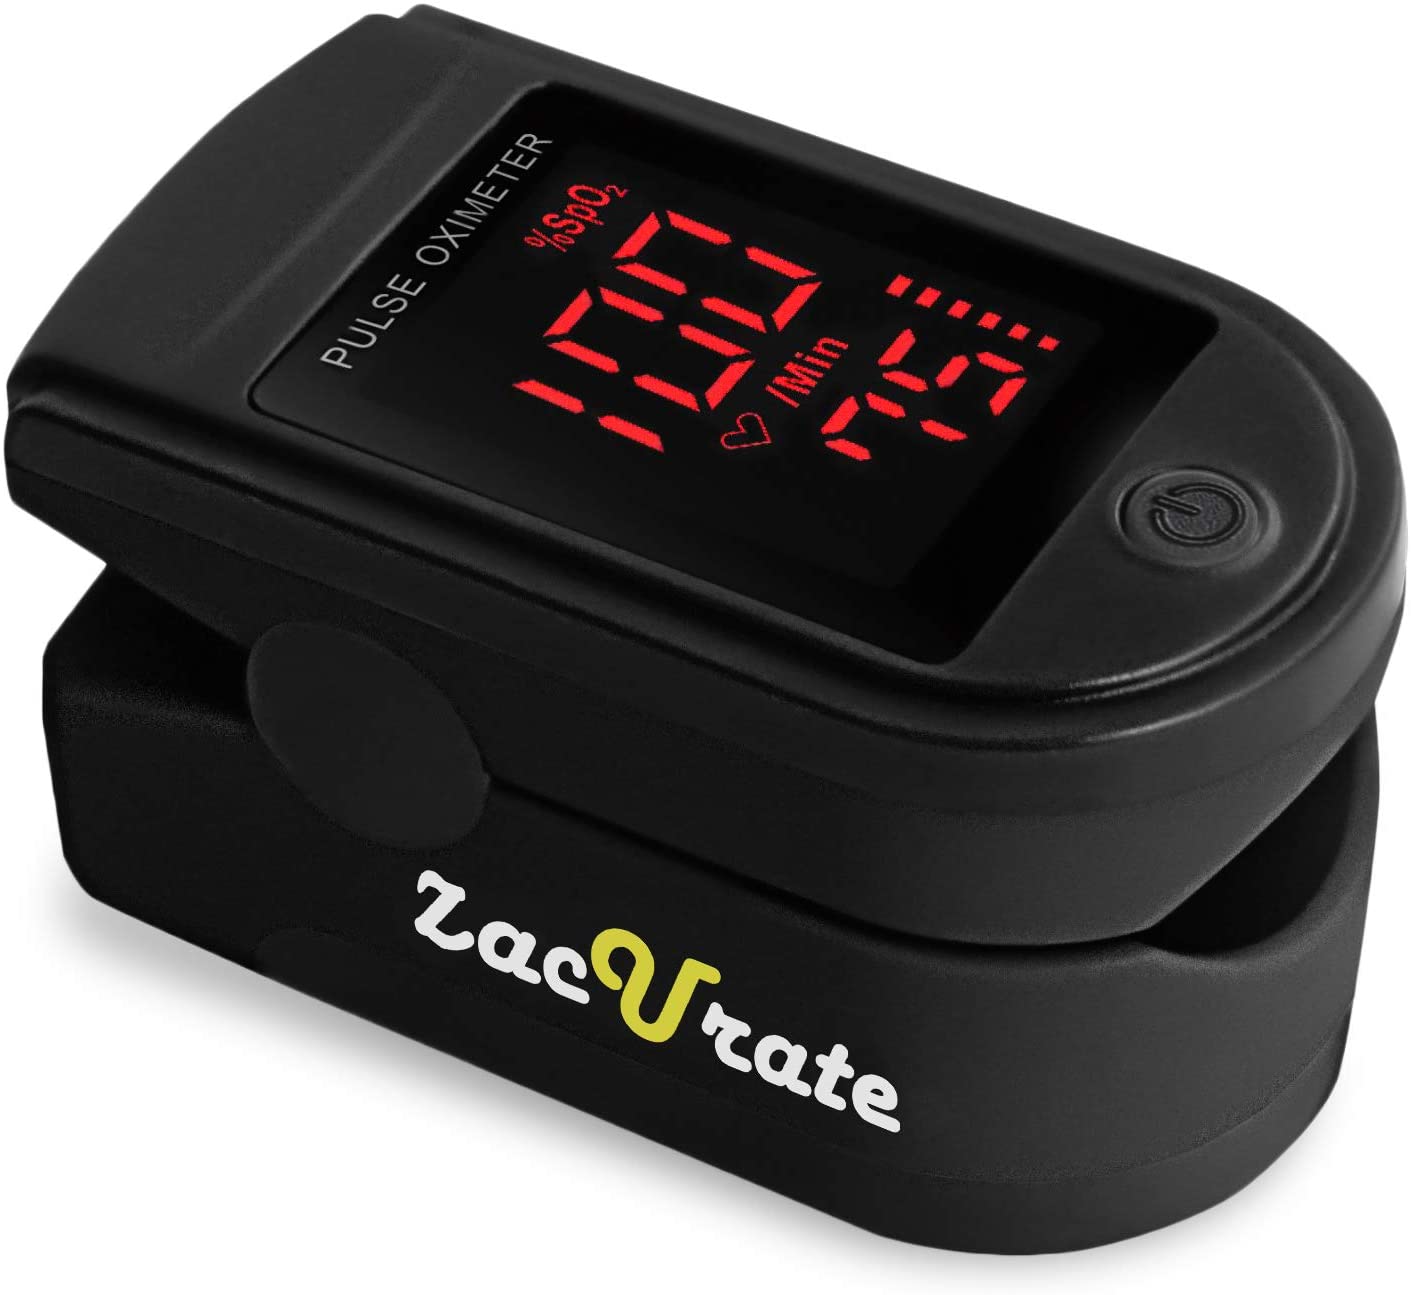 Zacurate Pro Series 500DL Fingertip Pulse Oximeter Blood Oxygen Saturation Monitor M430N-PRO-RB